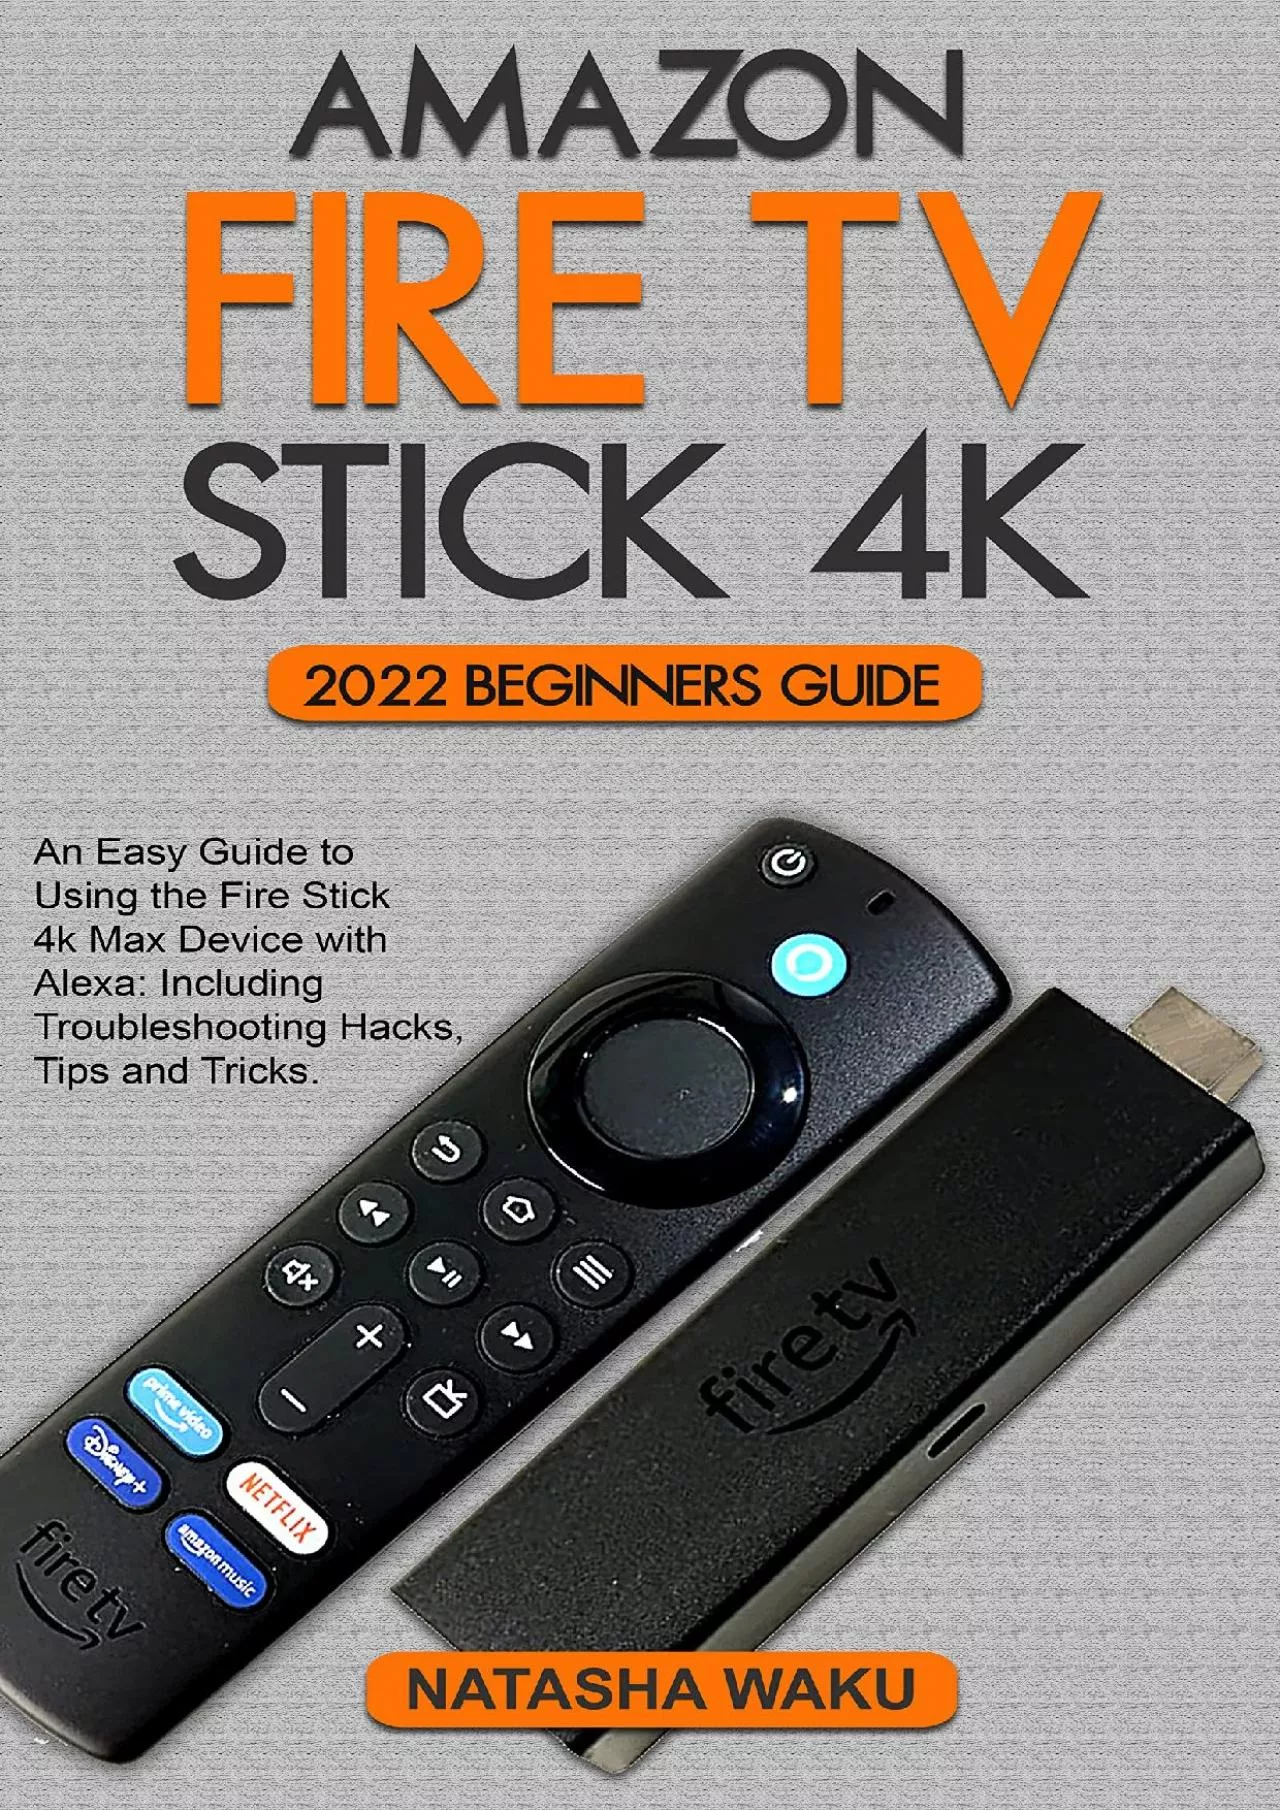 (EBOOK)-AMAZON FIRE TV STICK 4K 2022 BEGINNERS GUIDE: An Easy Guide to Using the Fire